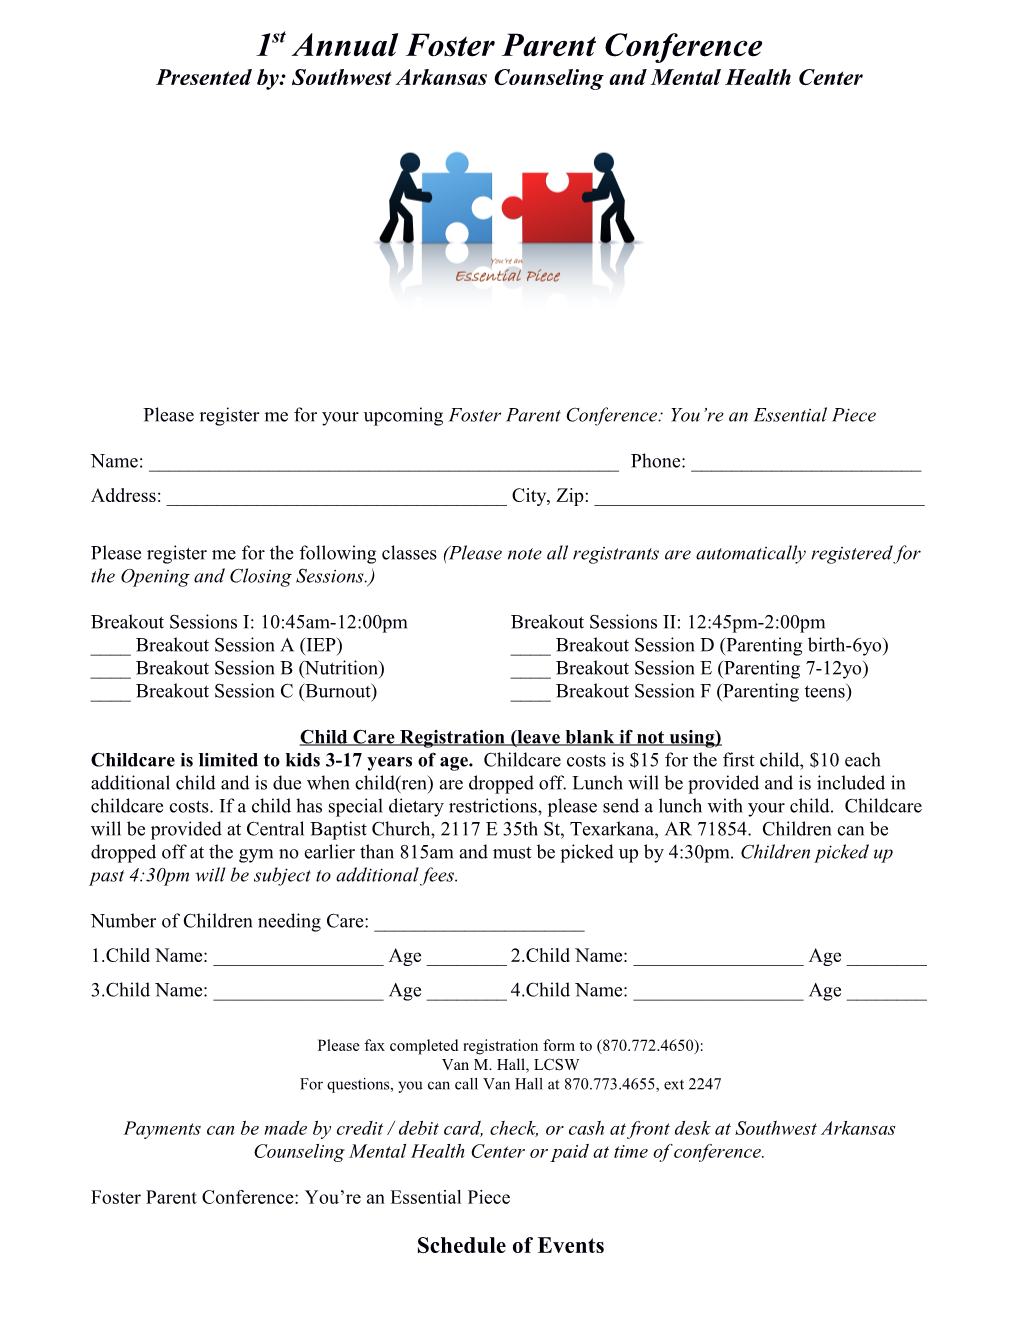 1St Annual Foster Parent Conference